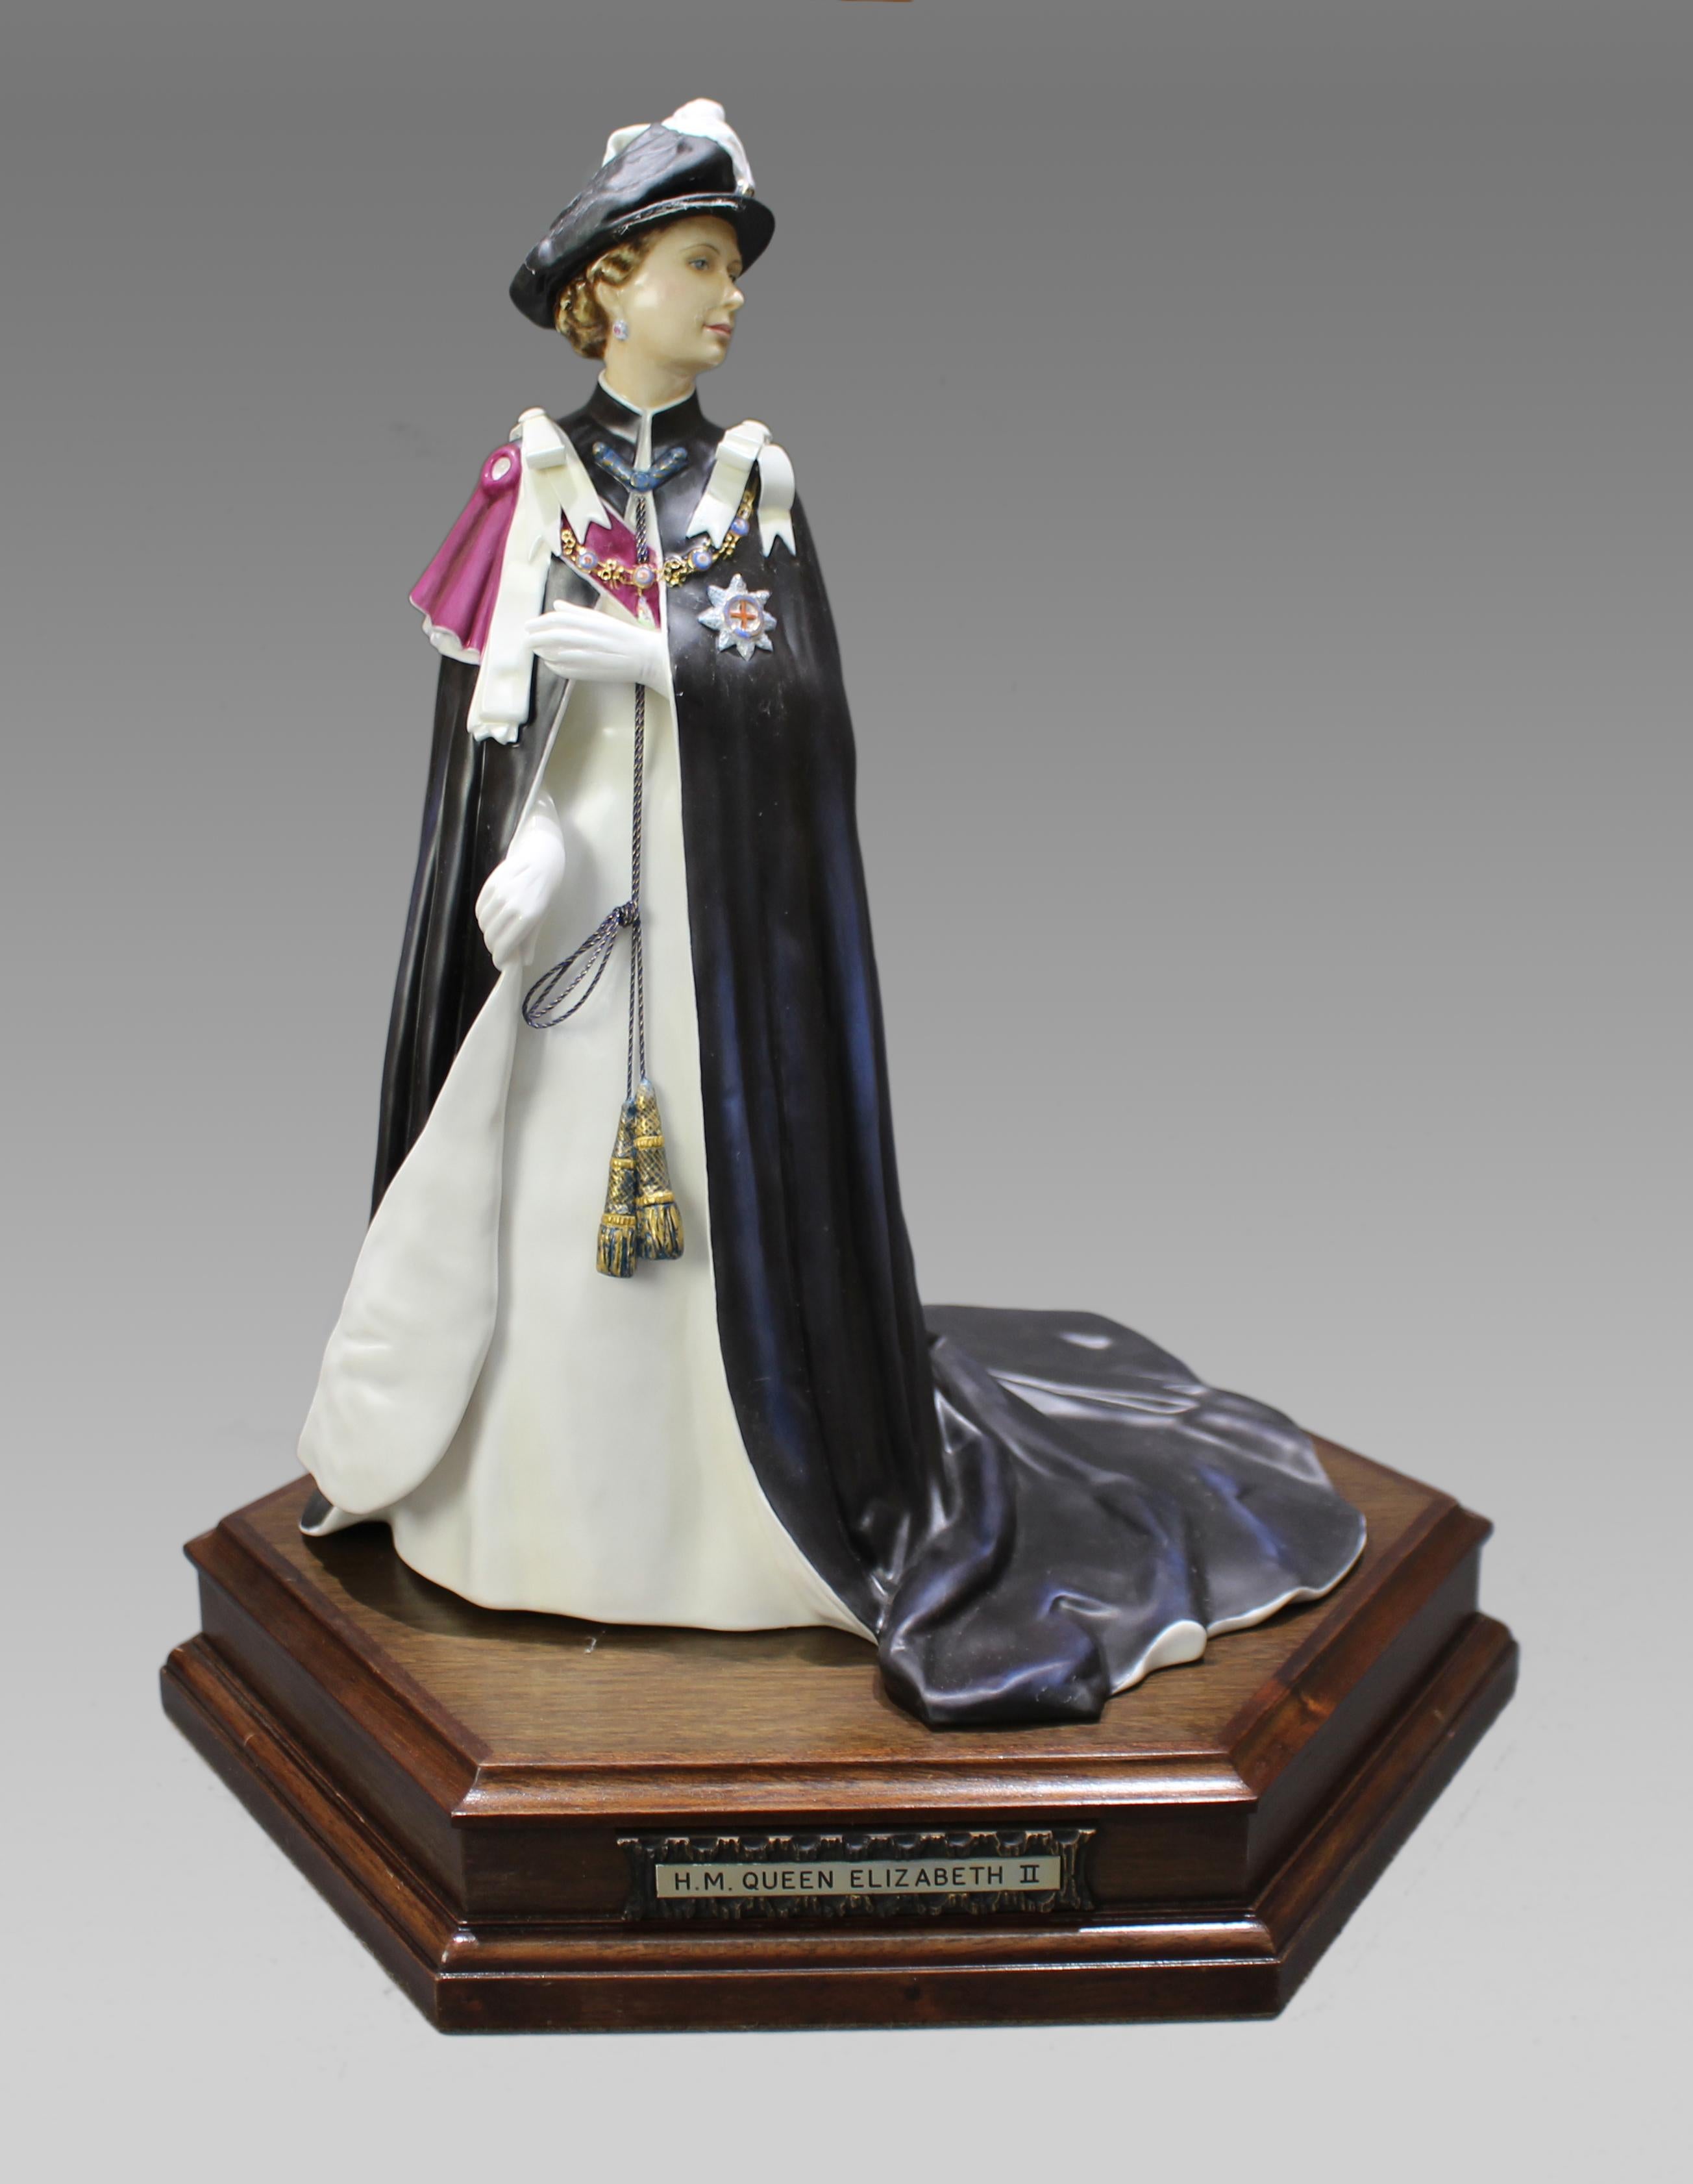 Royal worcester Elizabeth II by Ronald van Ruyckevelt


Manufacturer Royal Worcester, Made in England, 1976

Modelled by Ronald van Ruyckevelt

Series Queens Regnant

Limited Edition Produced in a limited numbered edition of 250, of which